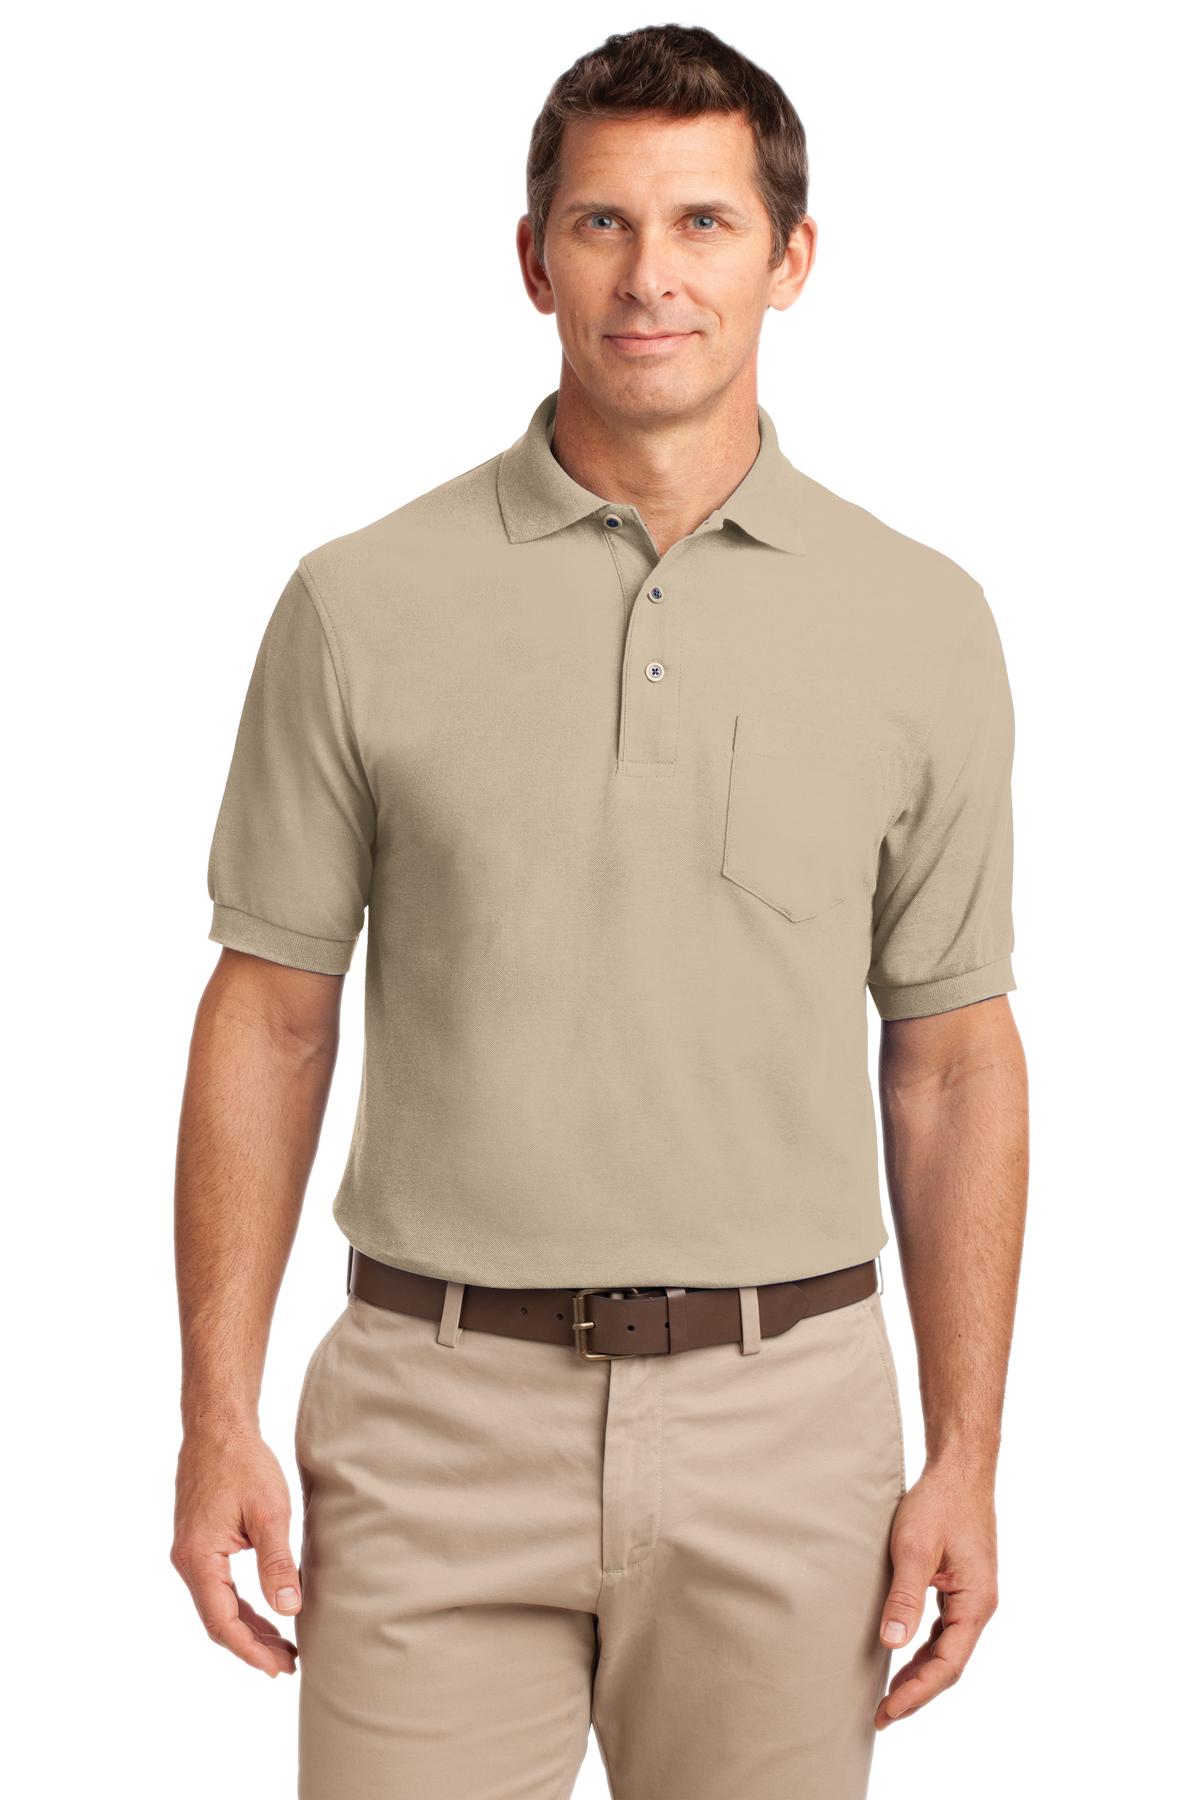 Morgan Horse AssociationPort Authority® Silk Touch™ Polo with Pocket.  K500P